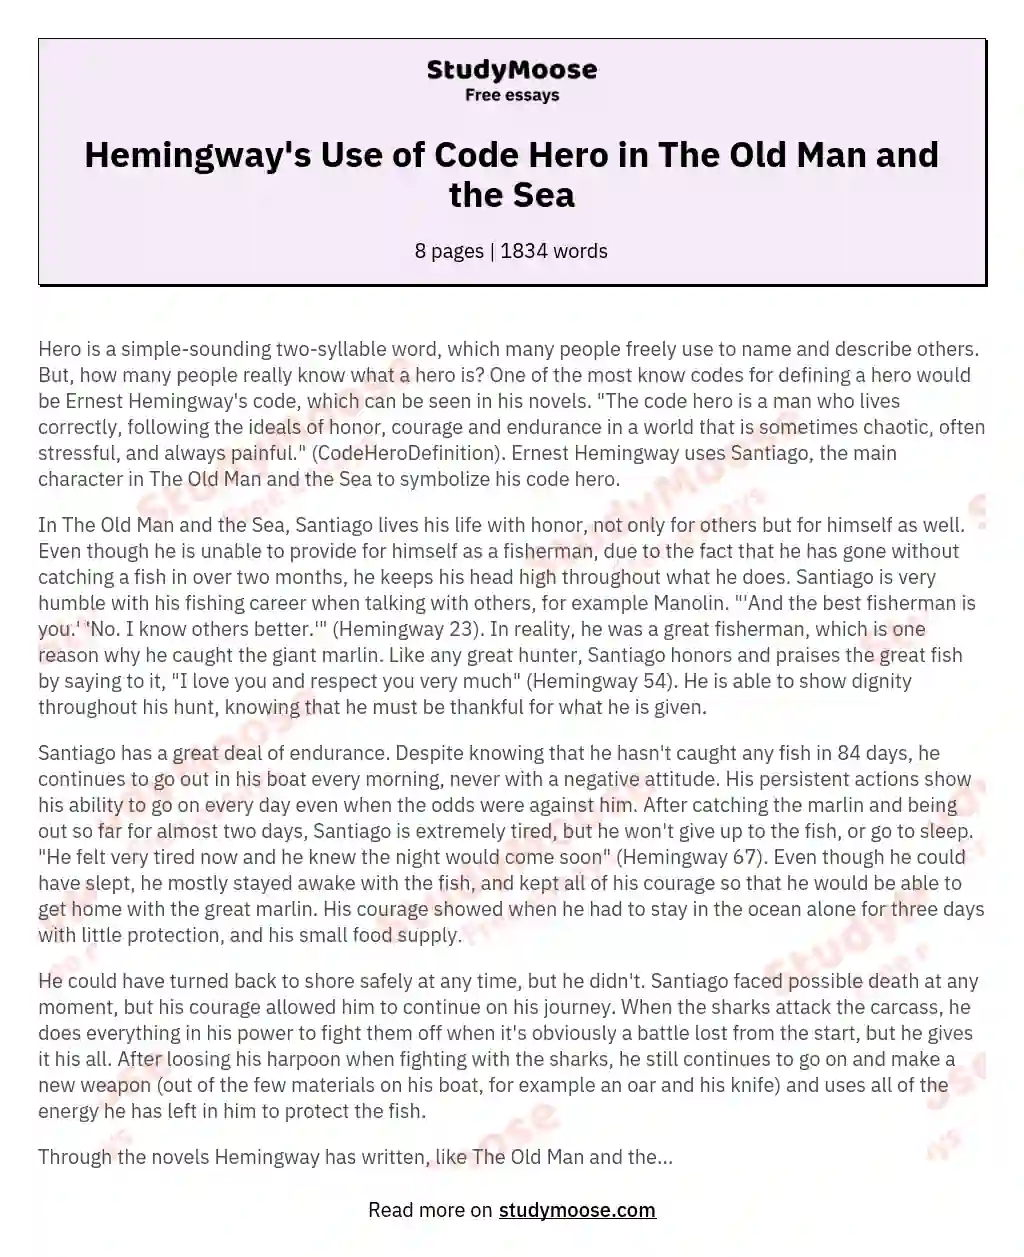 Hemingway's Use of Code Hero in The Old Man and the Sea essay